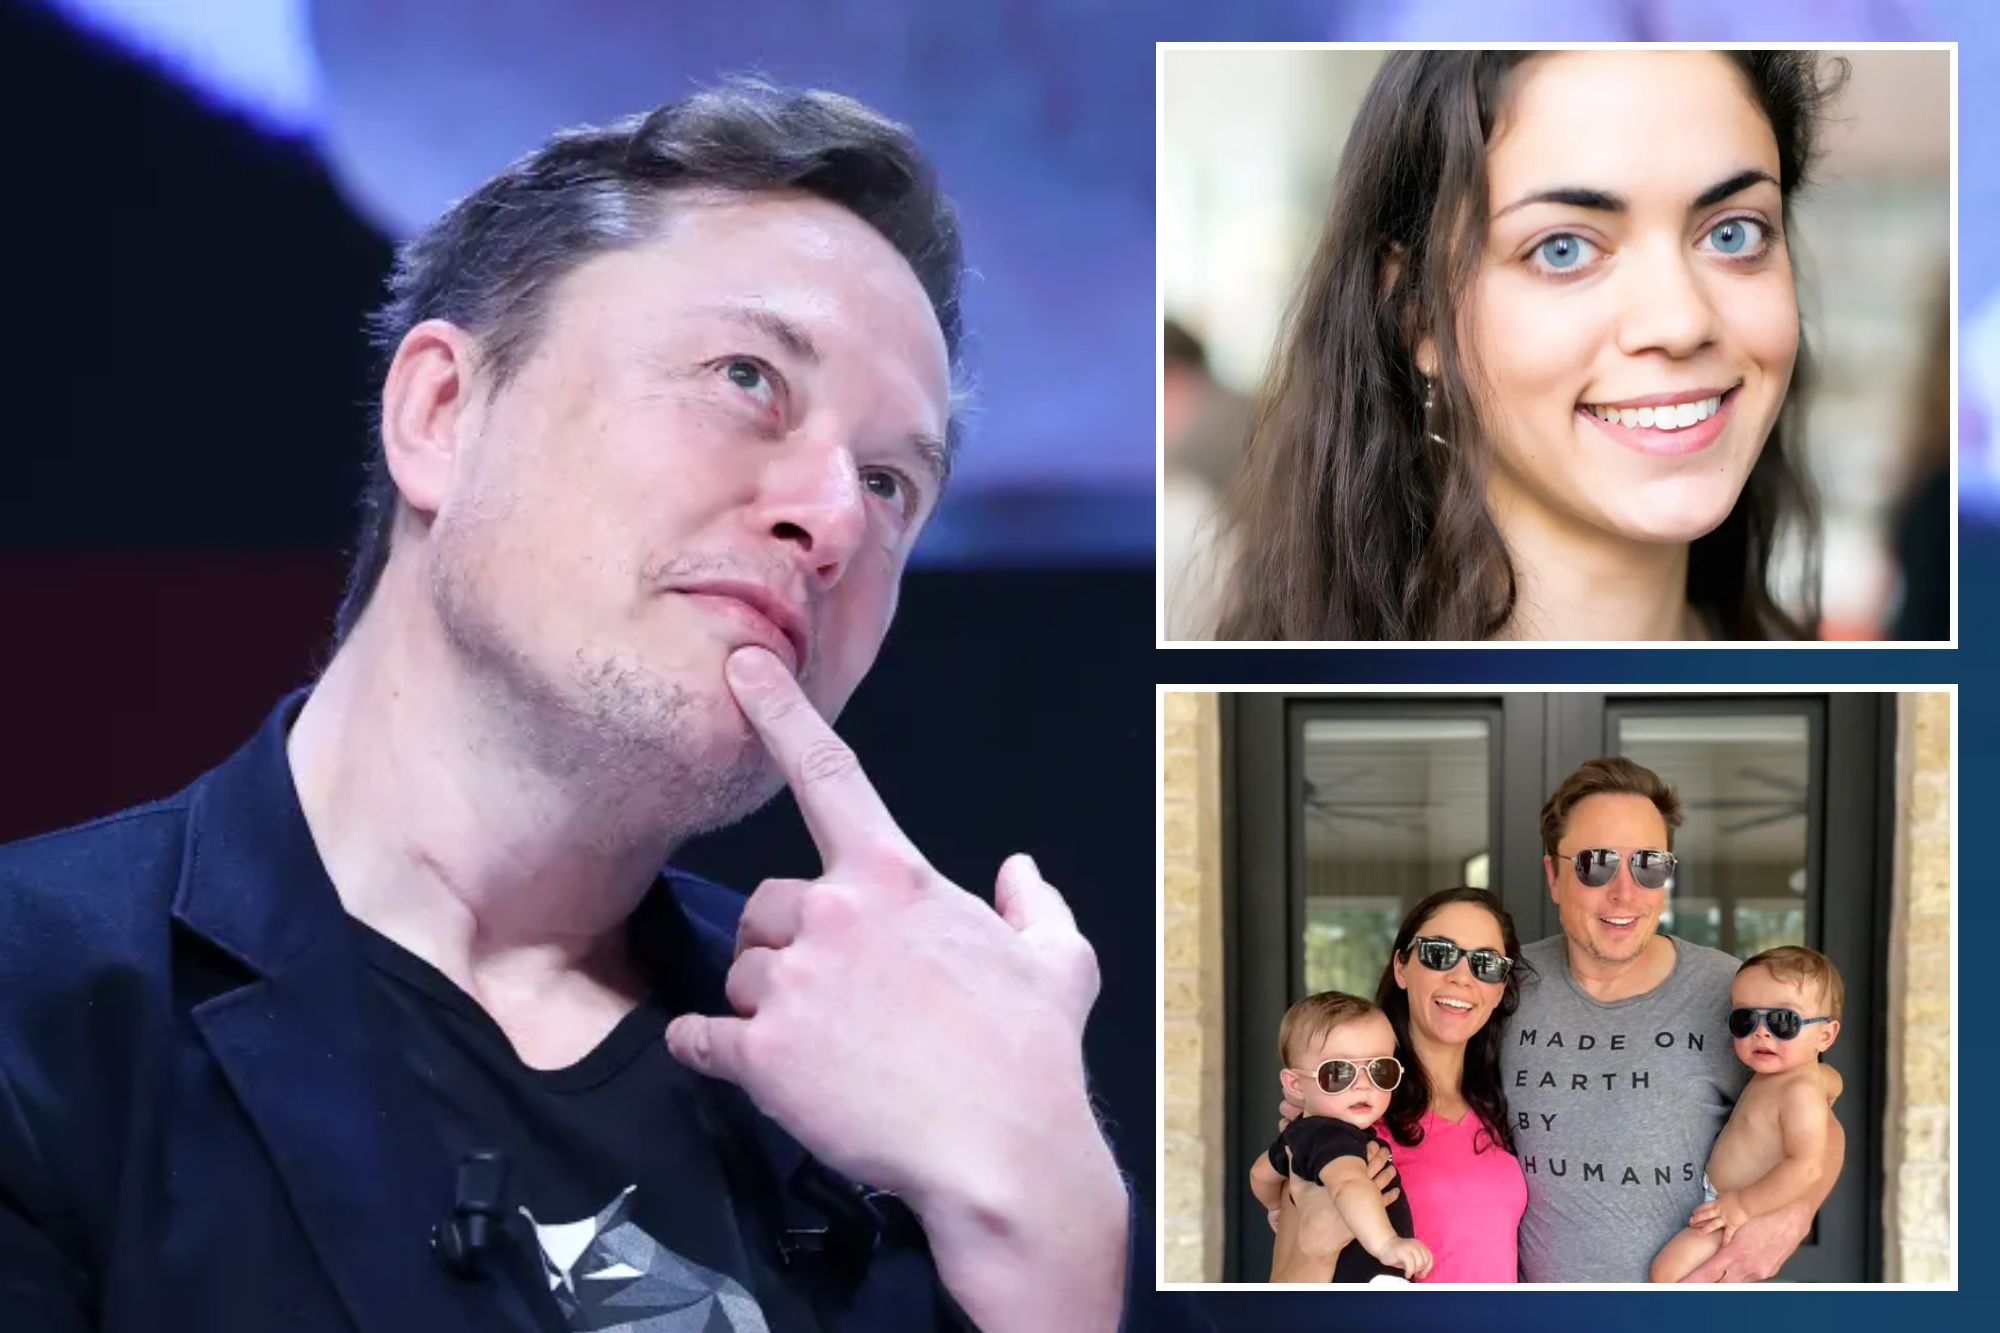 Elon Musk fathered a third child with Neuralink executive: report